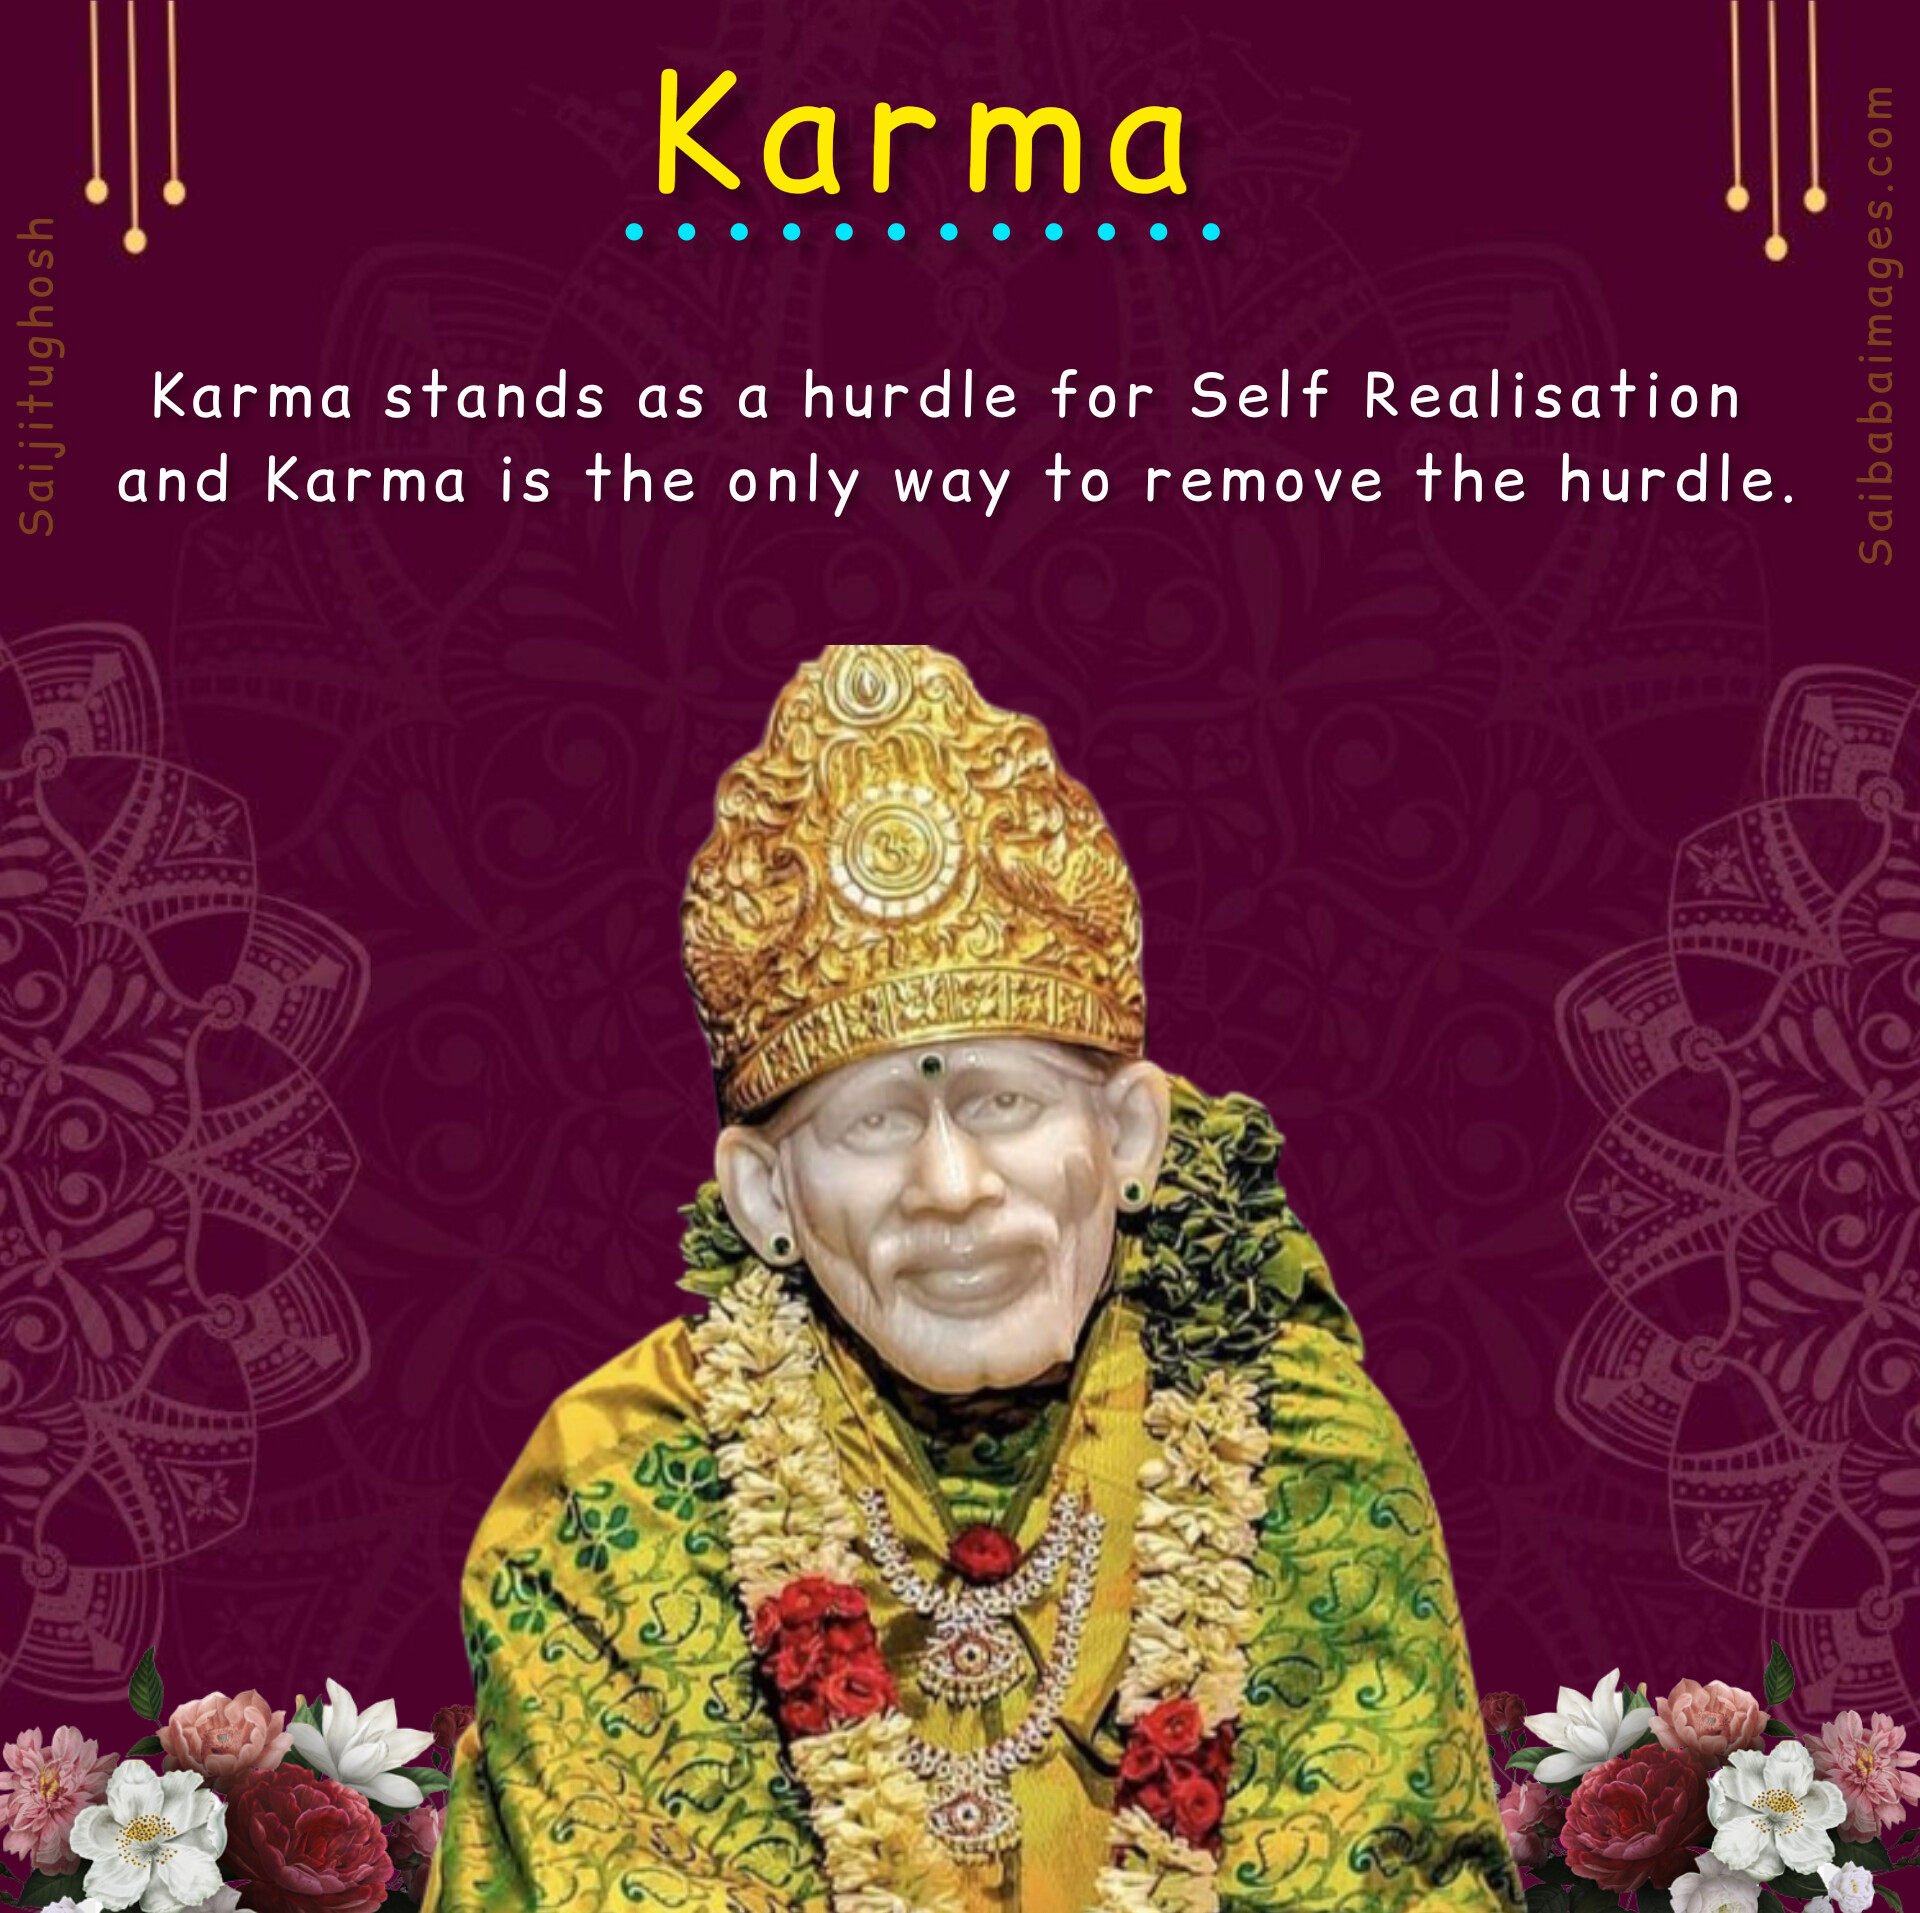 Sai Baba Idol Photo with flowers in purple background